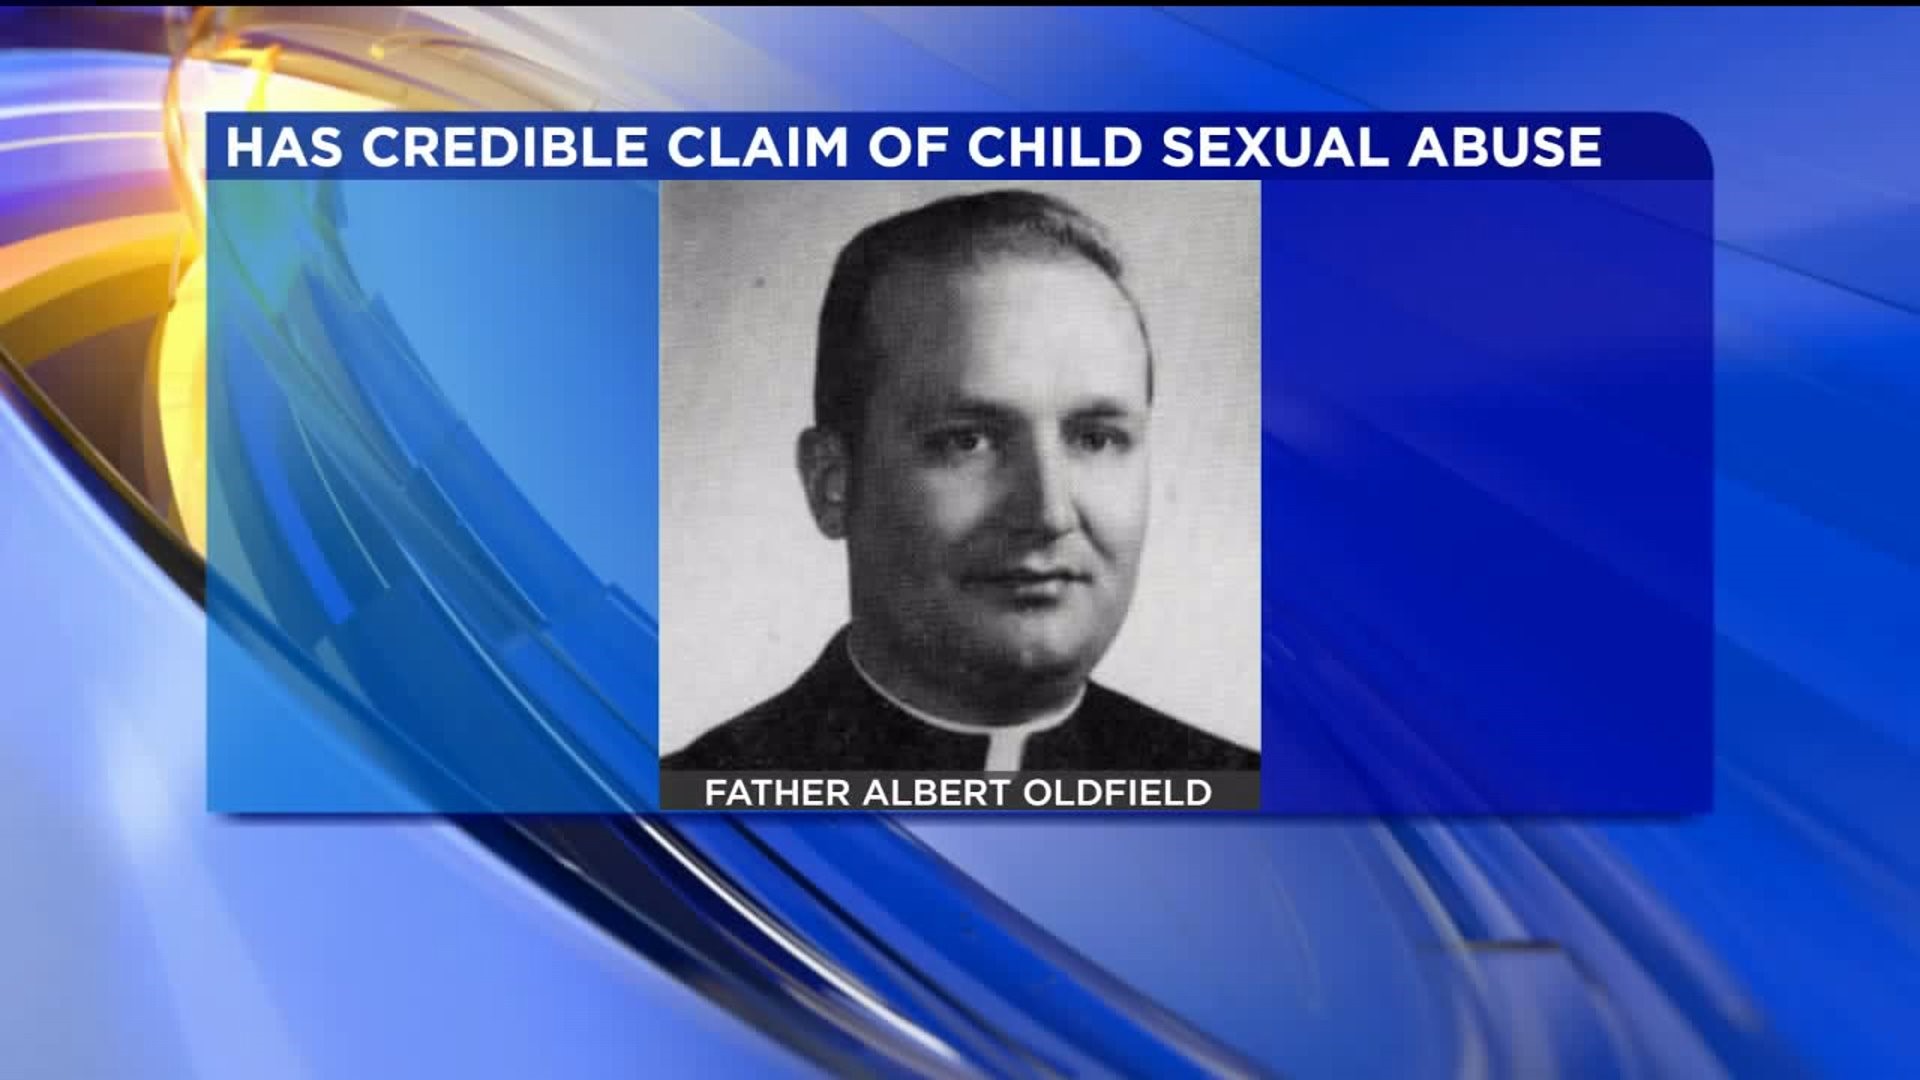 Diocese of Scranton Names Two More Priests Credibly Accused of Abuse